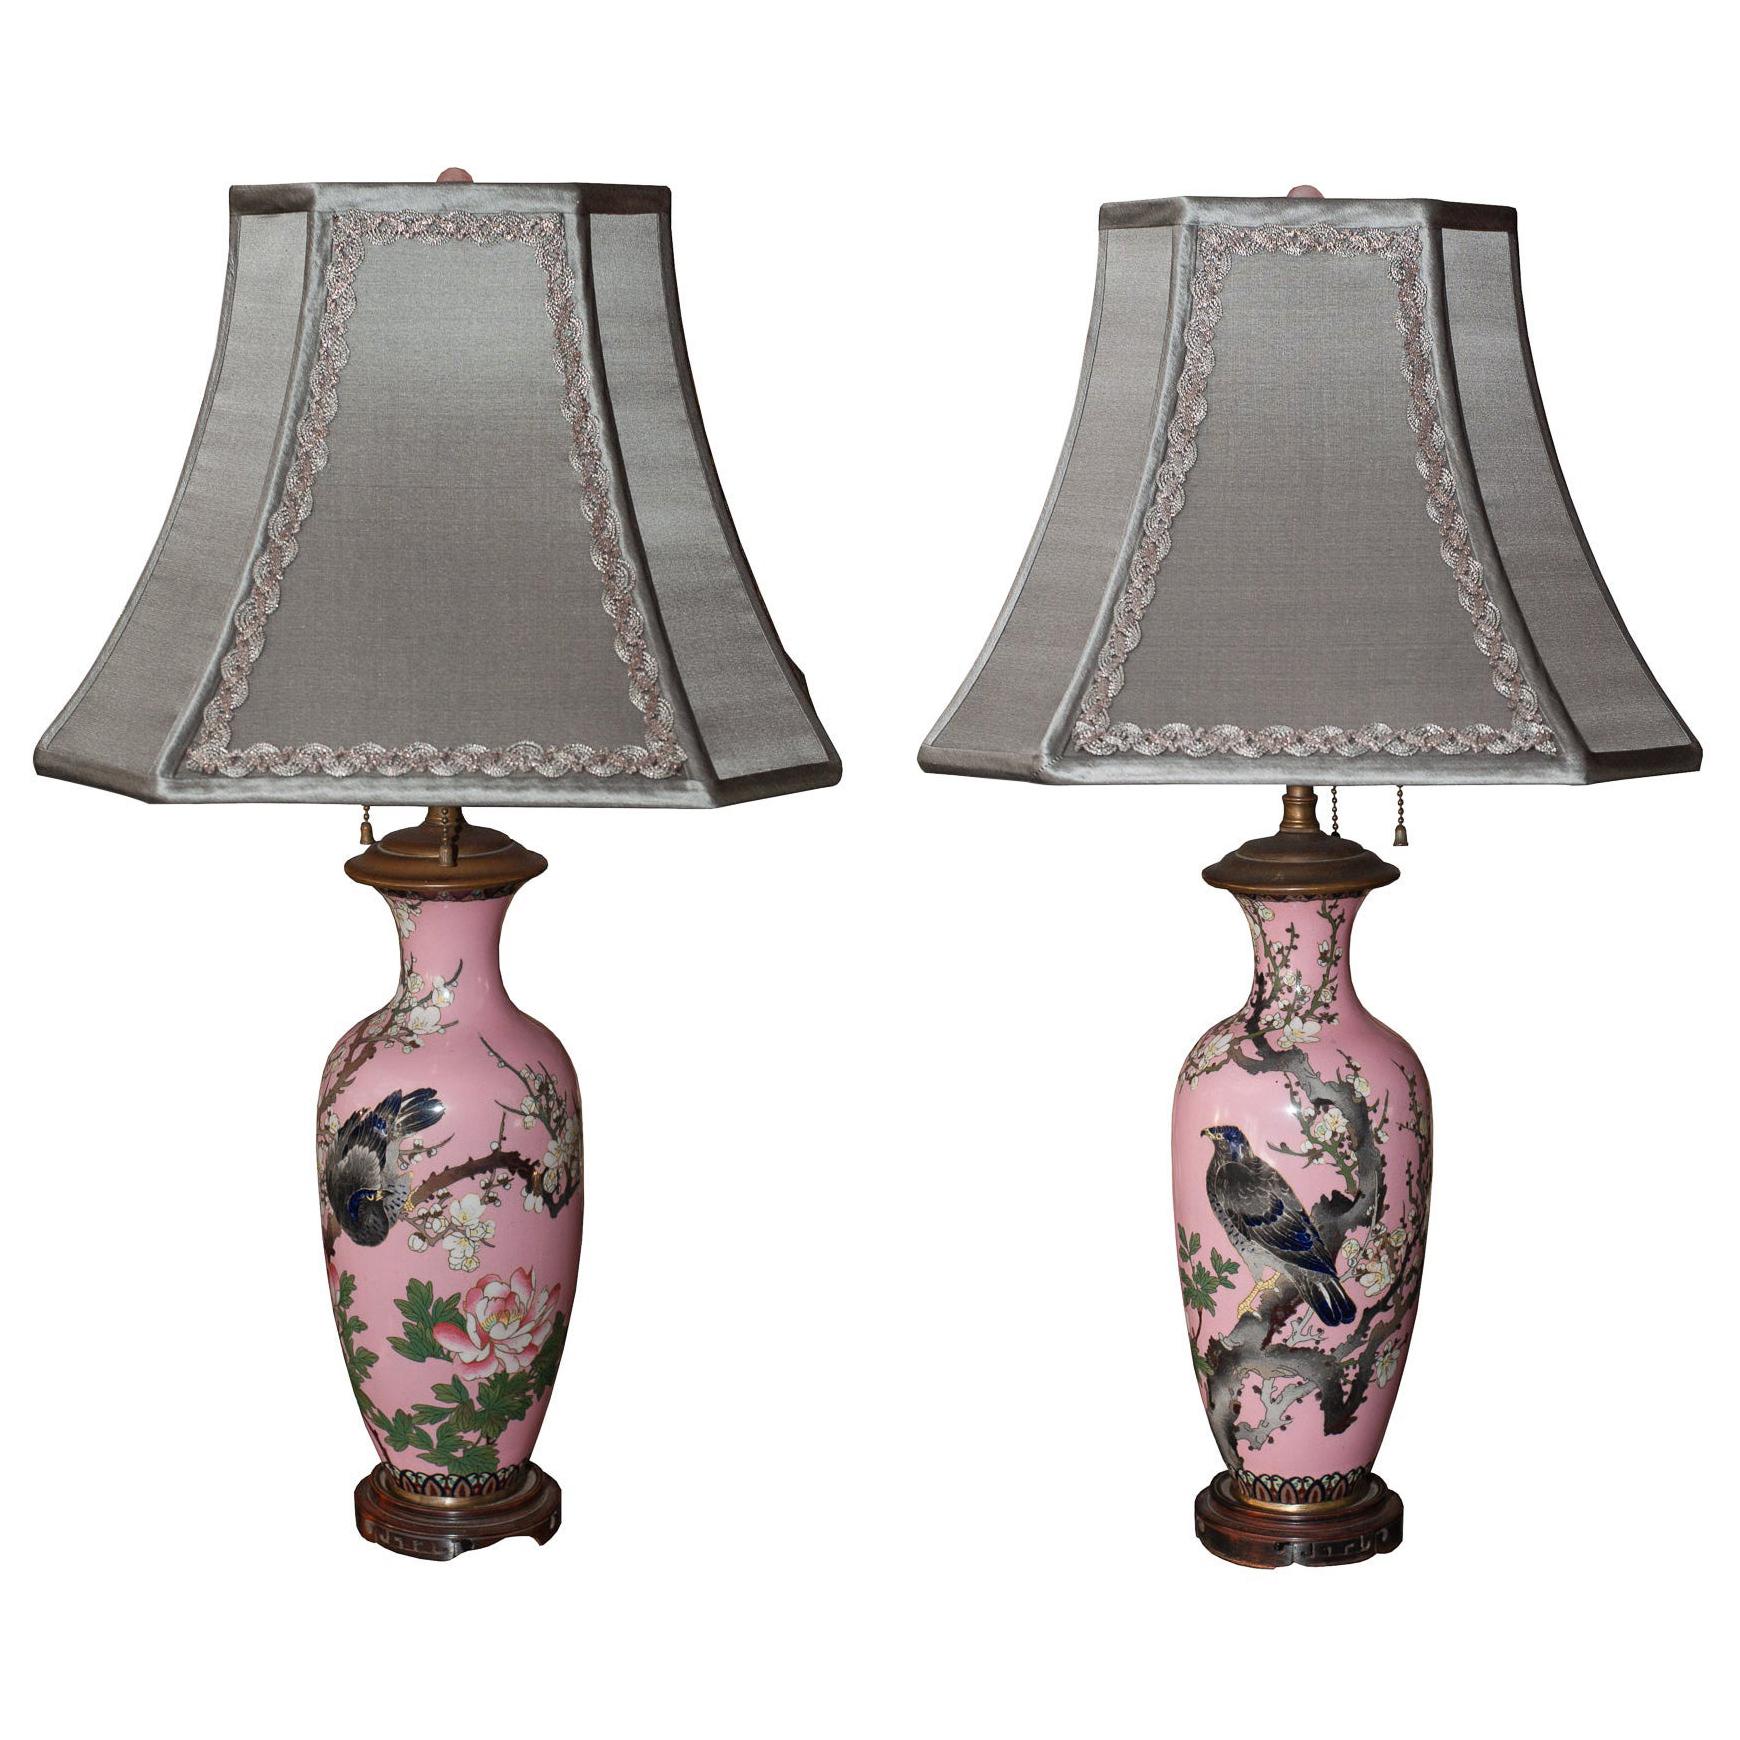 Antique Pair of Japanese Handpainted Pink Porcelain Lamps with Silver Shades